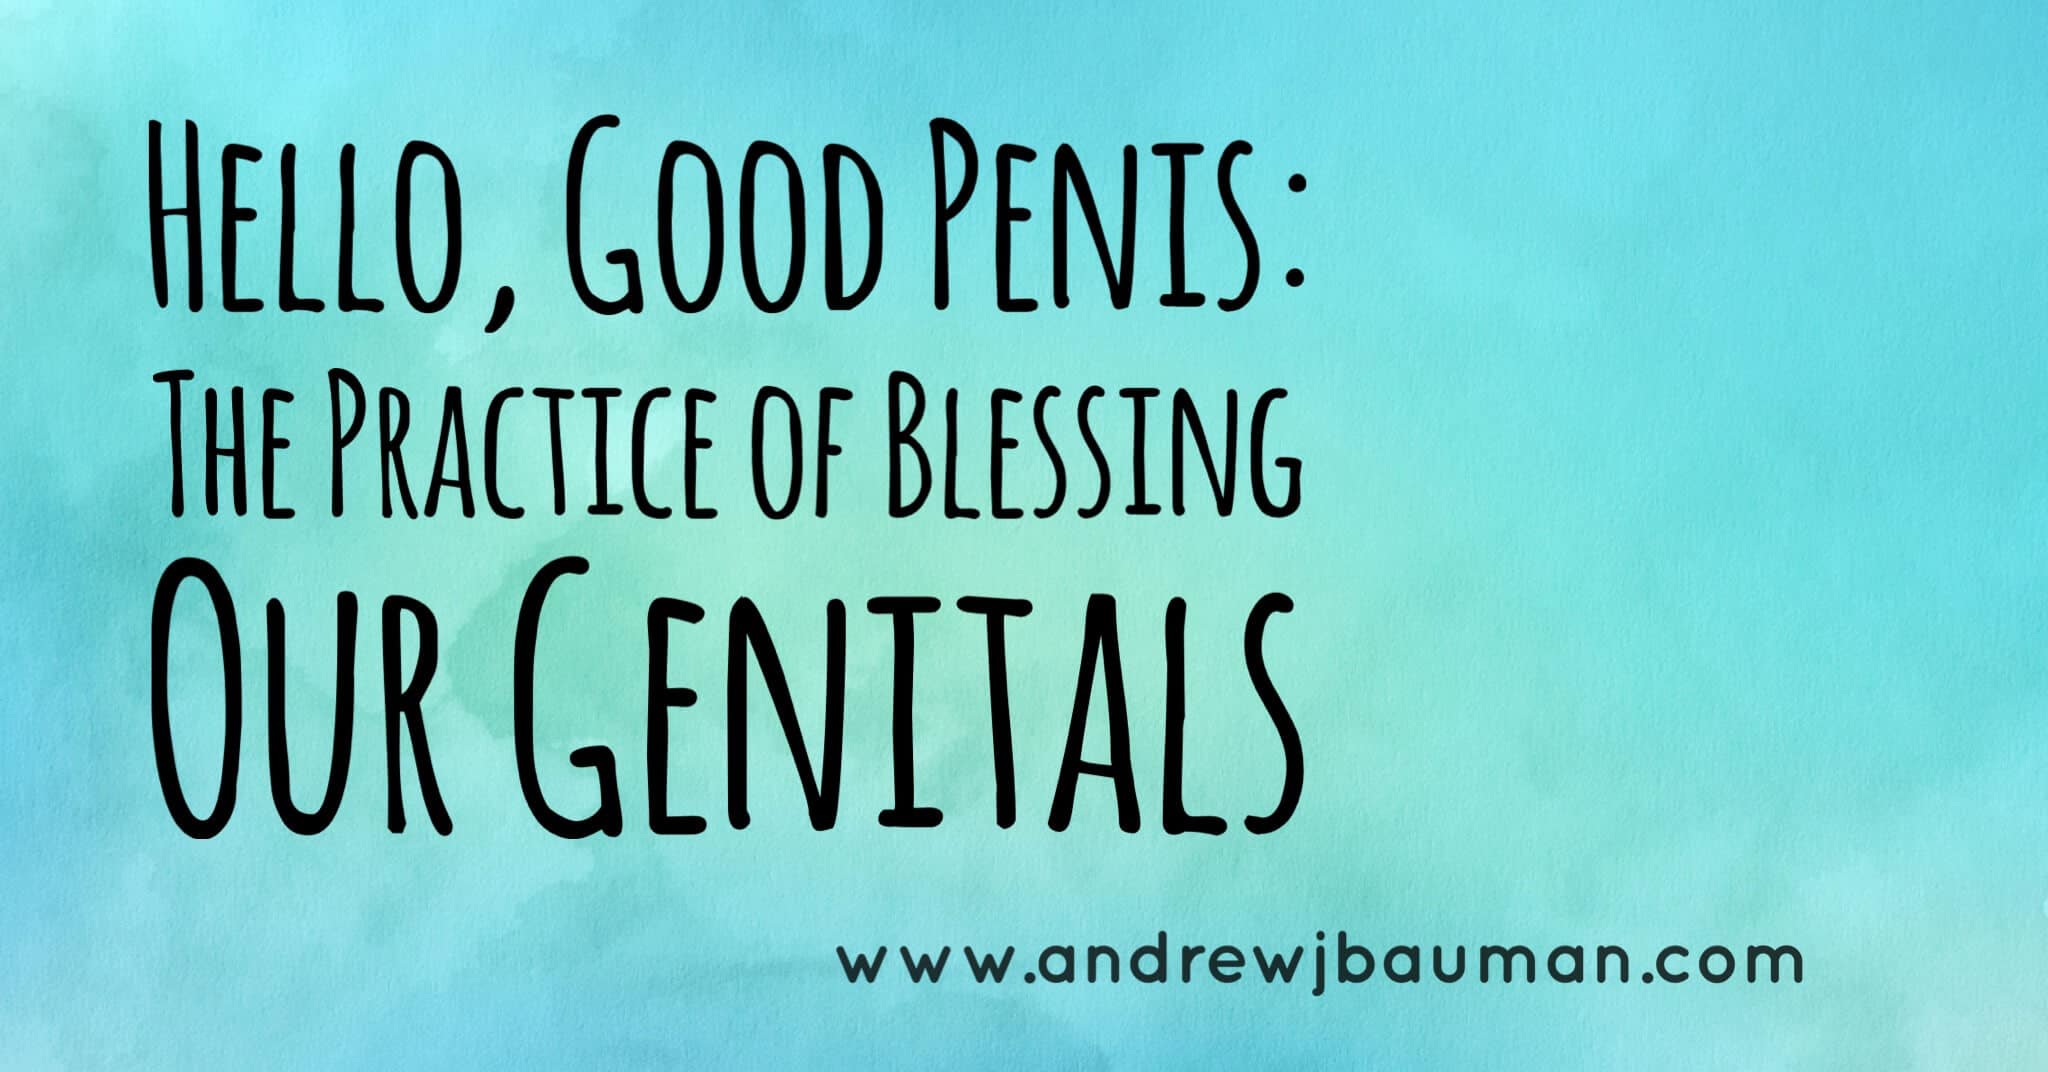 Hello, Good Penis The Practice of Blessing Our Genitals